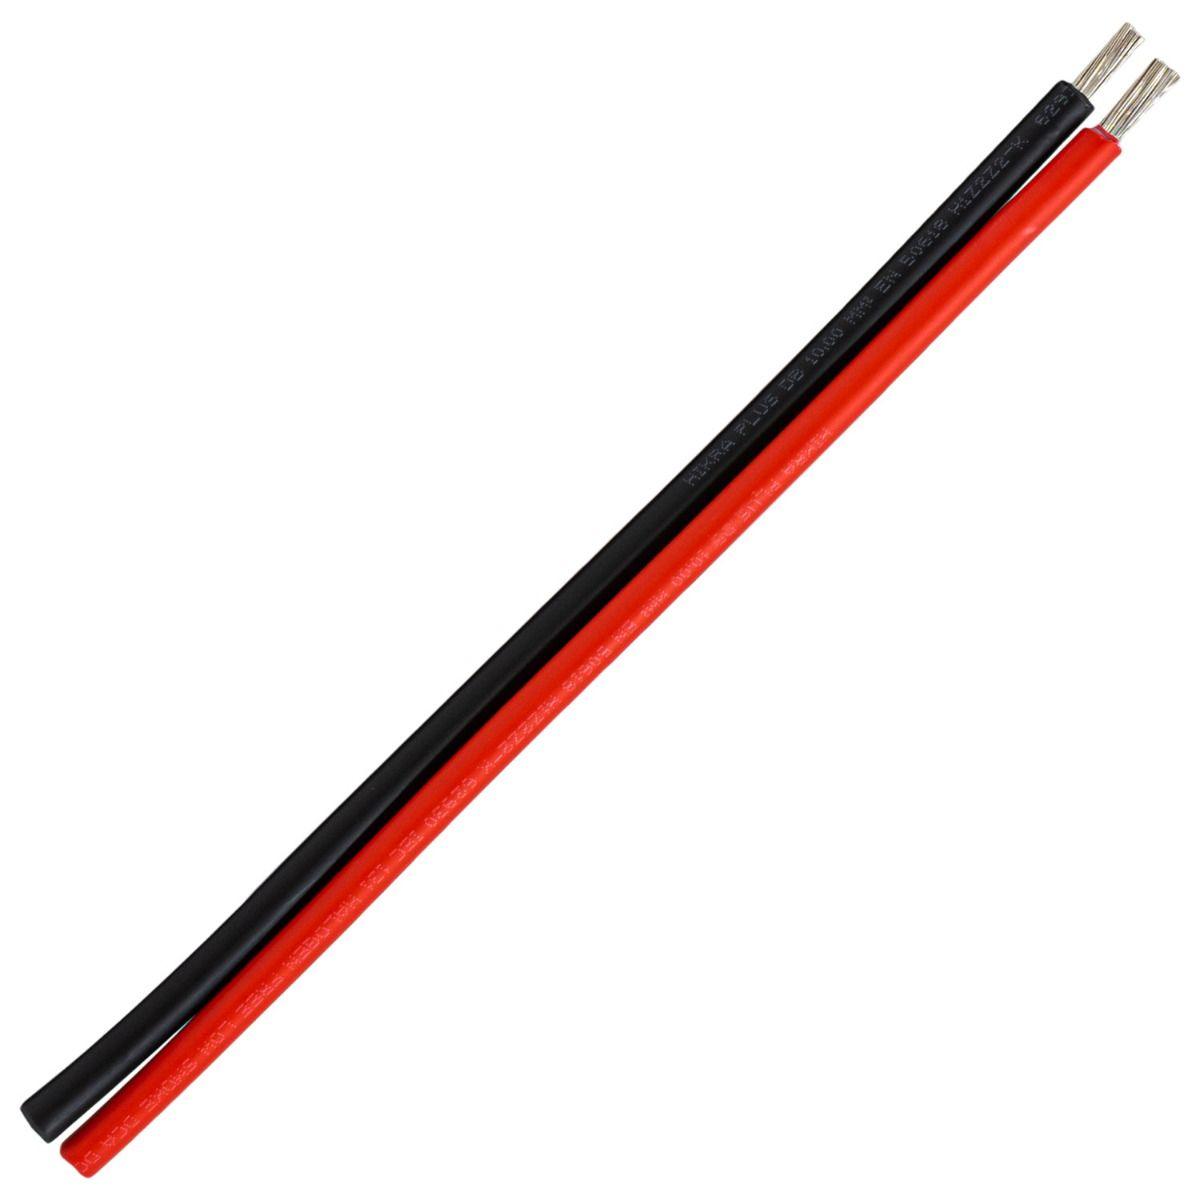 10m to 100m Solar PV Cable 10mm². Pair of Red and Black - VoltaconSolar